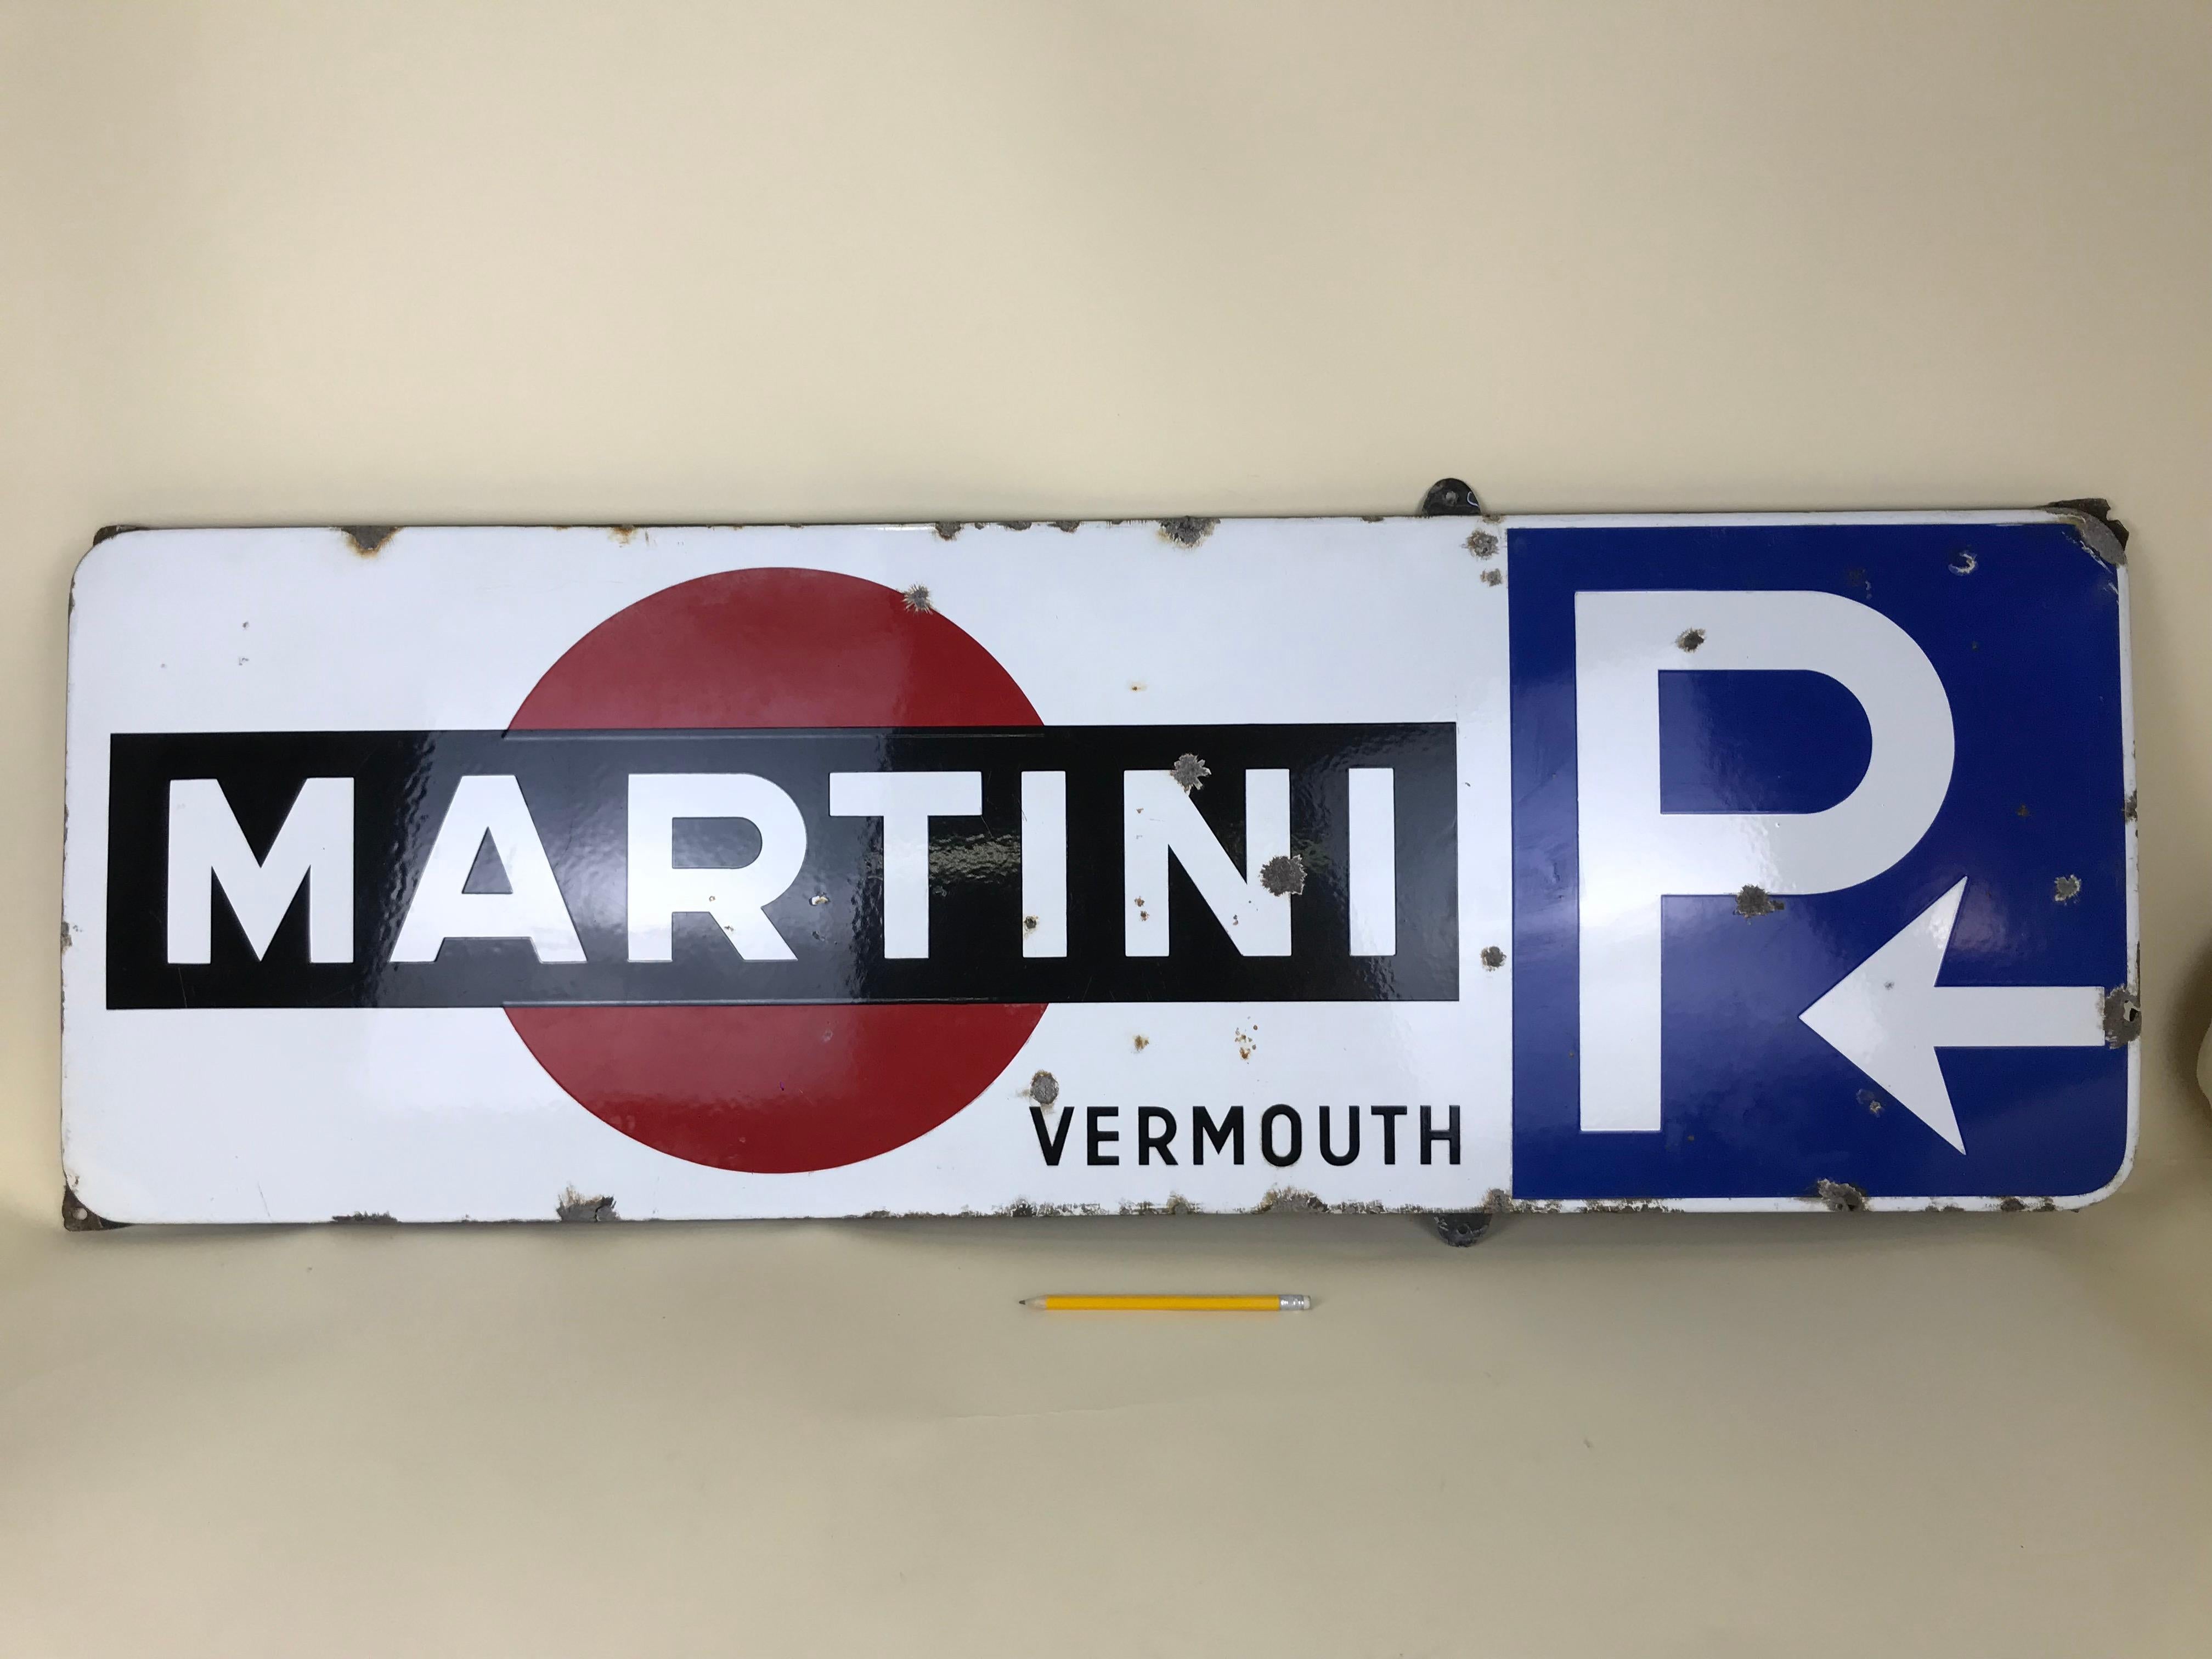 This rare enamel metal sign of Martini was produced in the 1950s in Belgium for advertising purposes.
In this sign the Martini logo is placed on white background and accompanied by word 